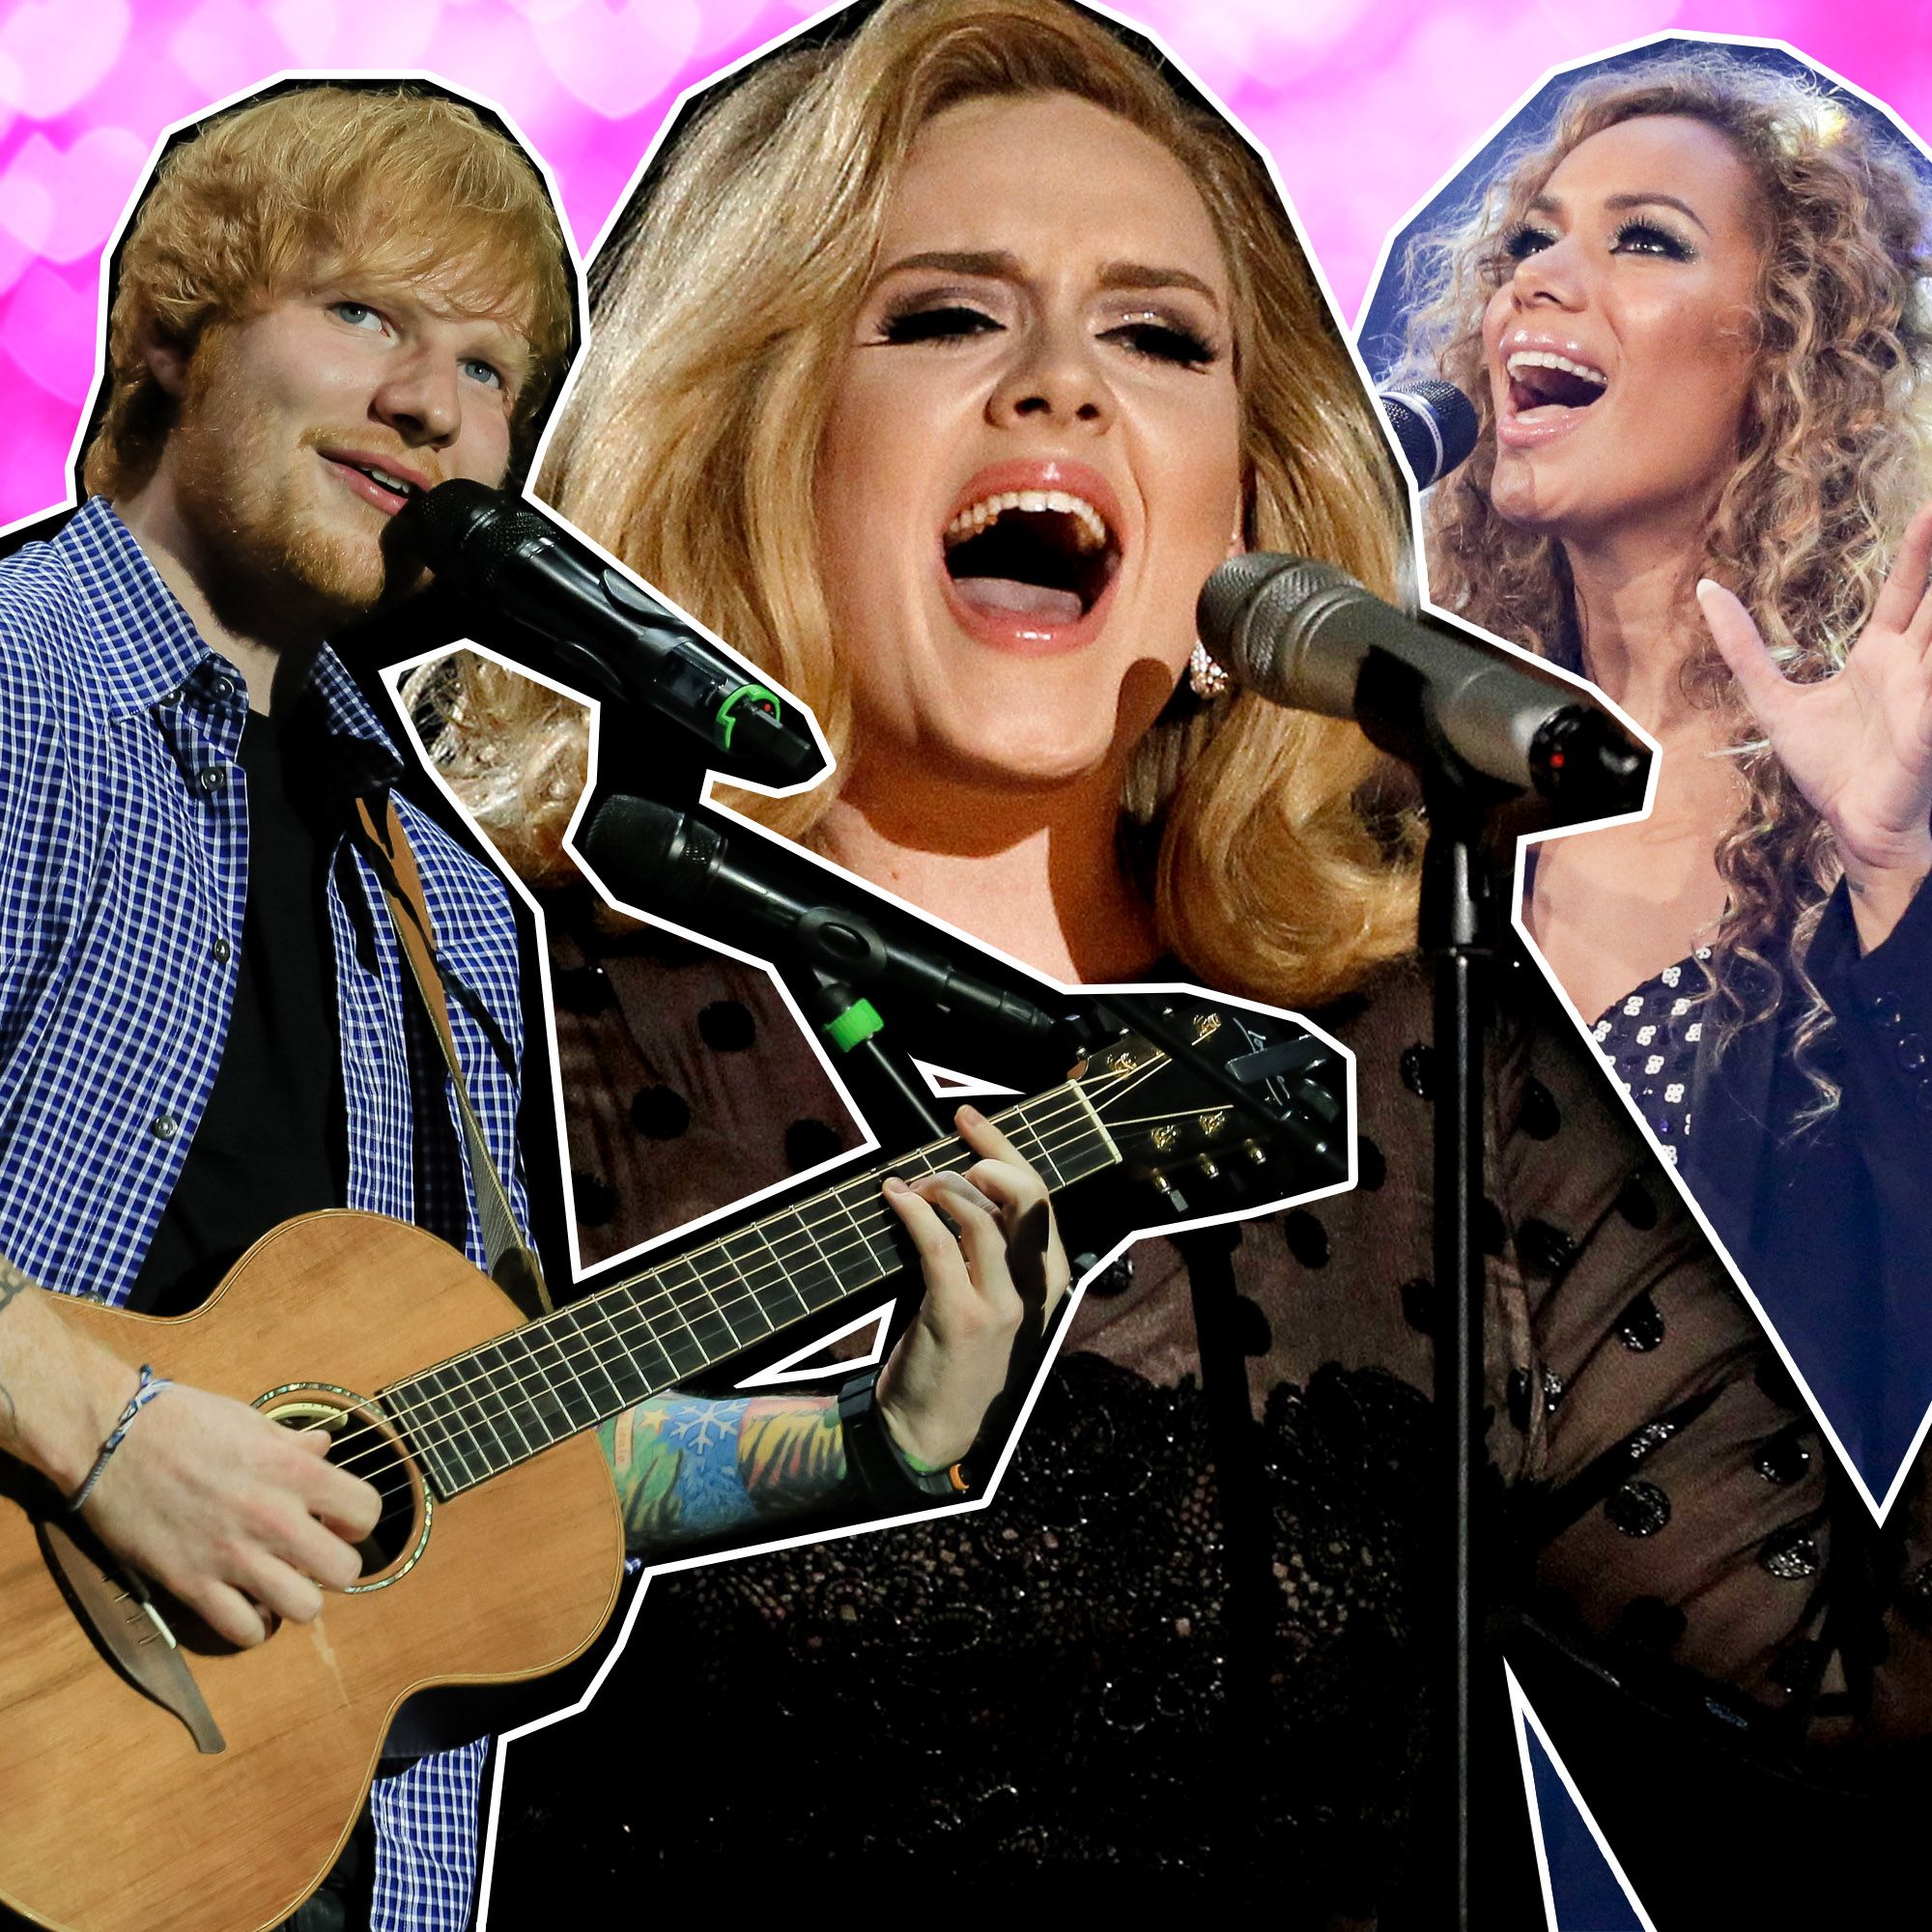 The results are in! The Biggest Pop Ballad of The 21st is…